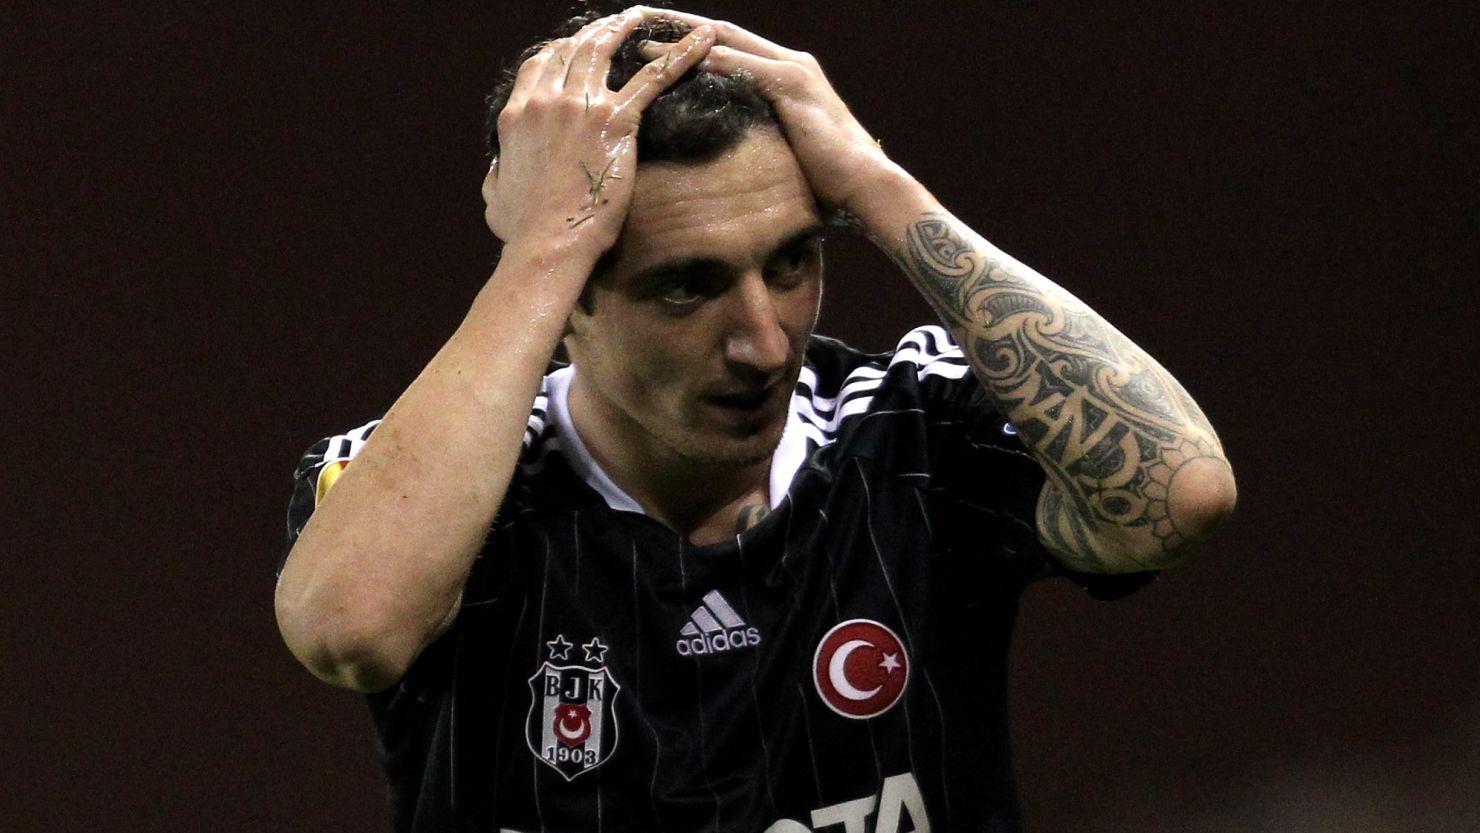 Besiktas reached trhe last 16 of the 2011-12 Europa League, losing to eventual champions Atletico Madrid.